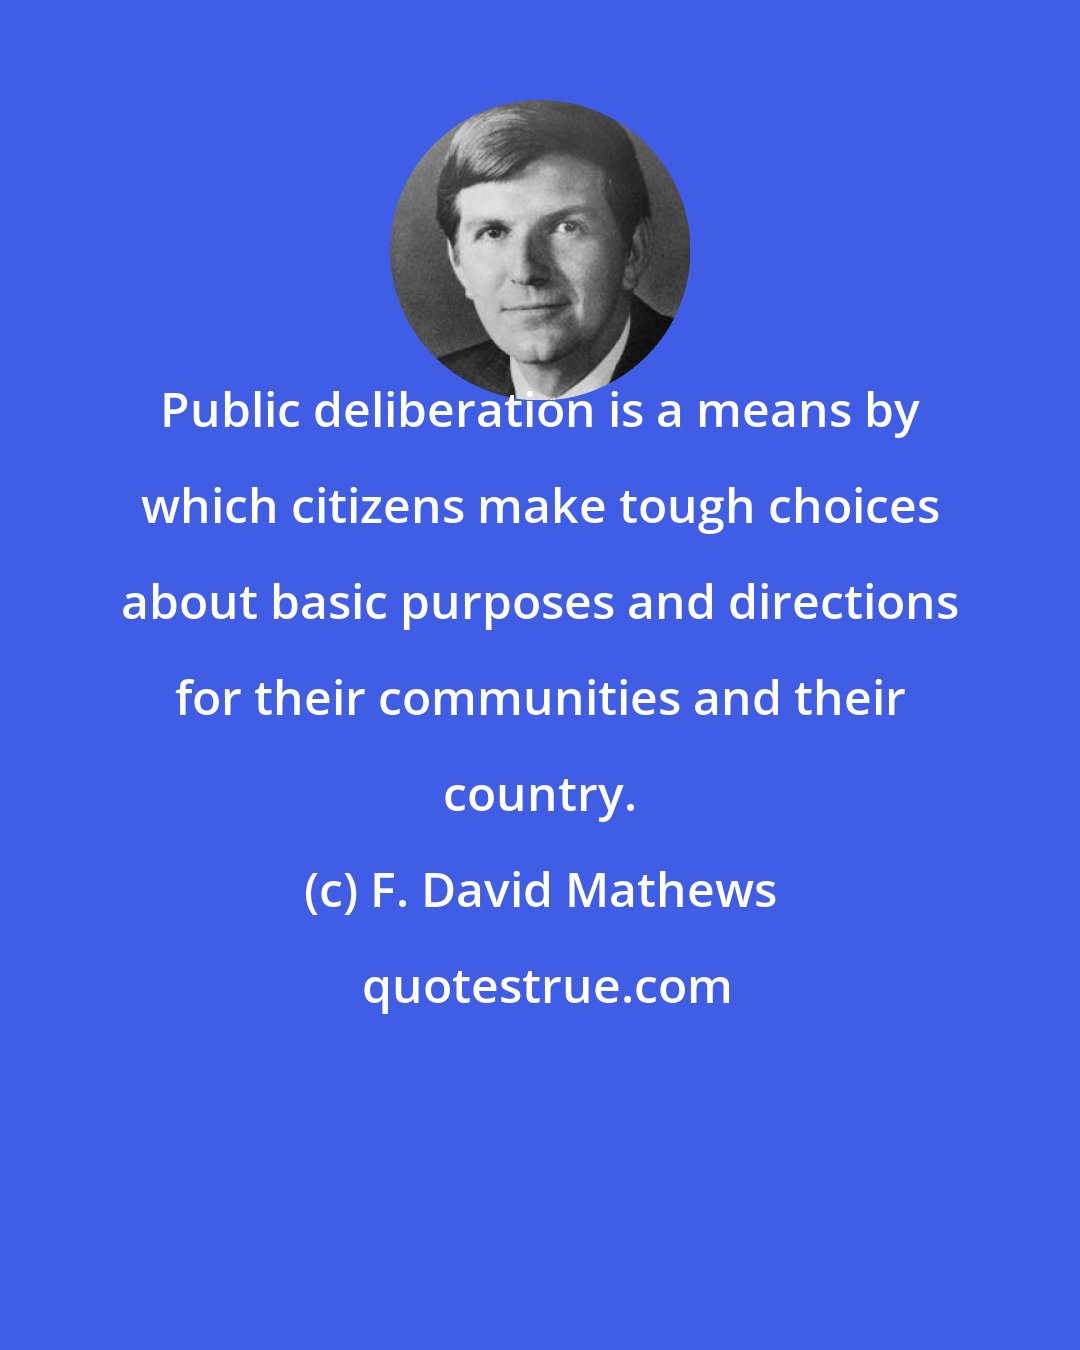 F. David Mathews: Public deliberation is a means by which citizens make tough choices about basic purposes and directions for their communities and their country.